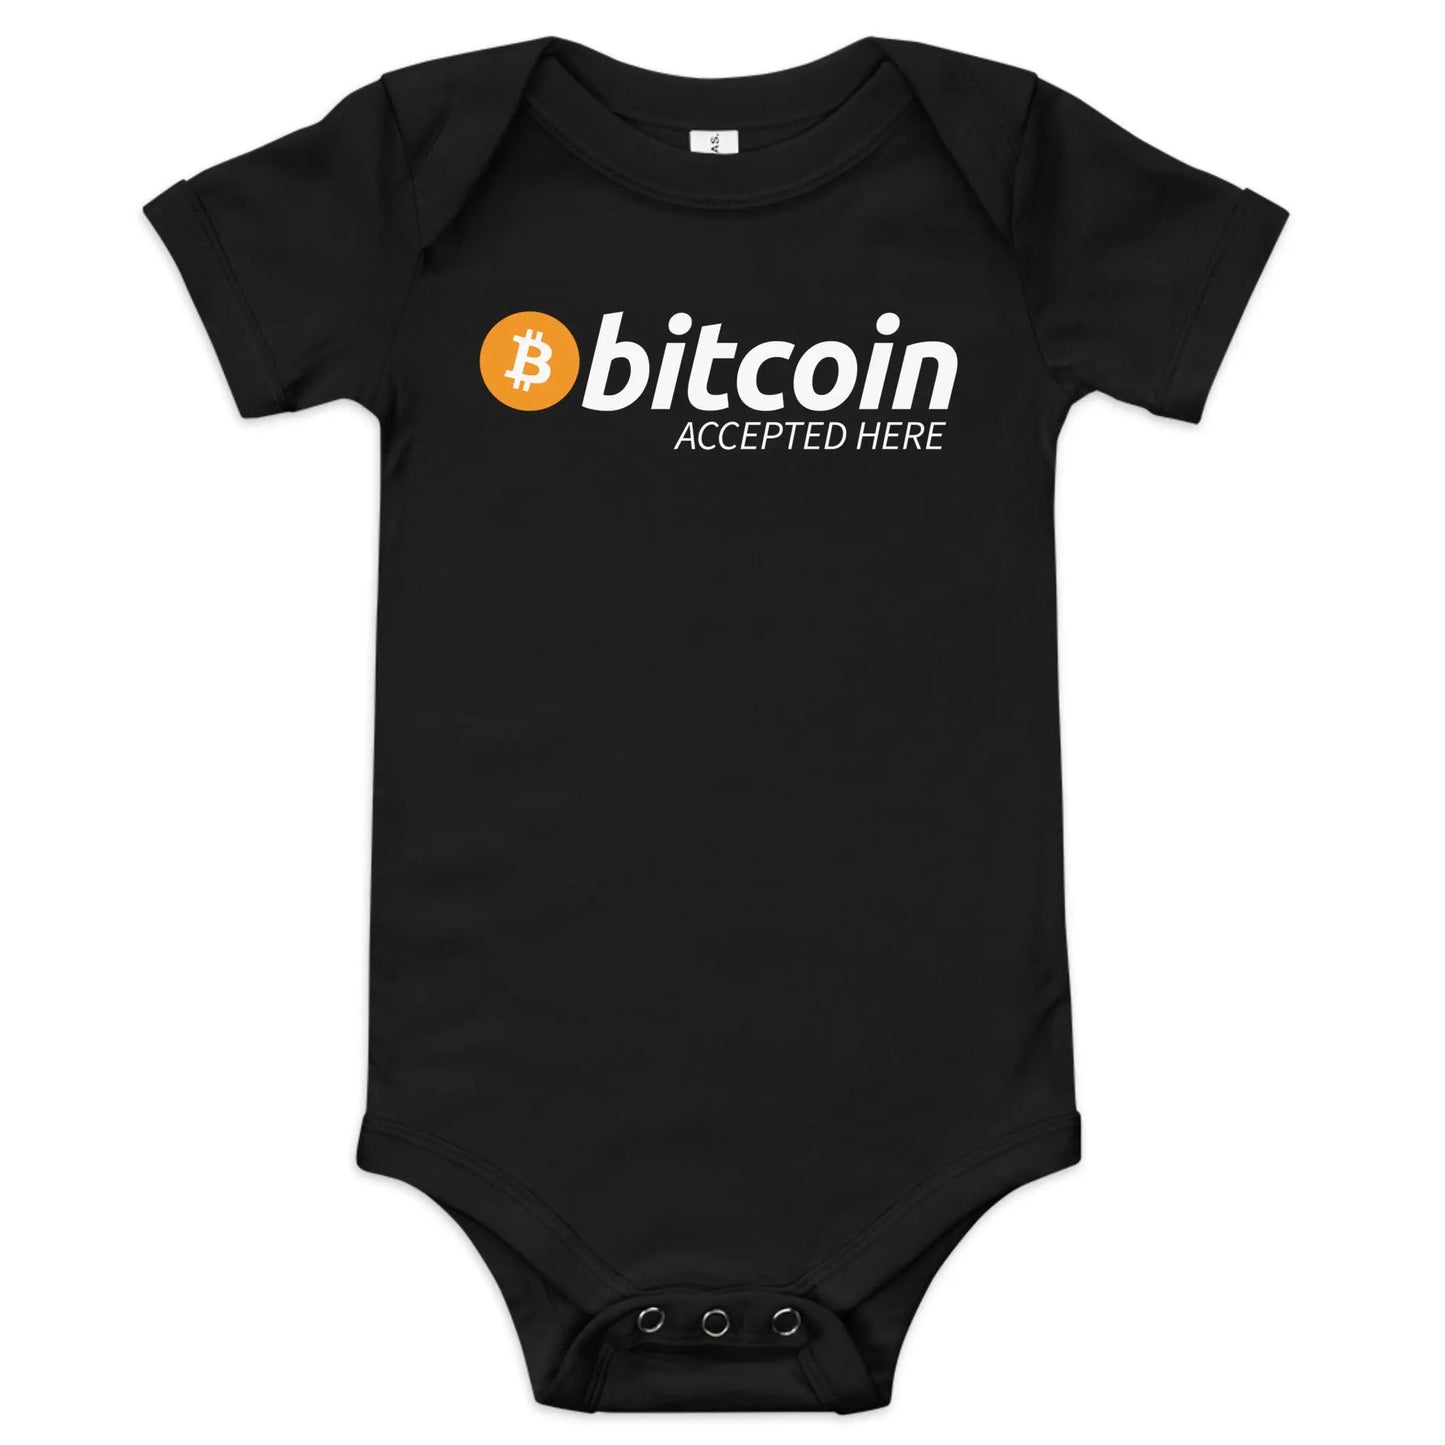 Bitcoin Accepted Here - Baby Bitcoin Body Suit - One Piece with Short Sleeve Black